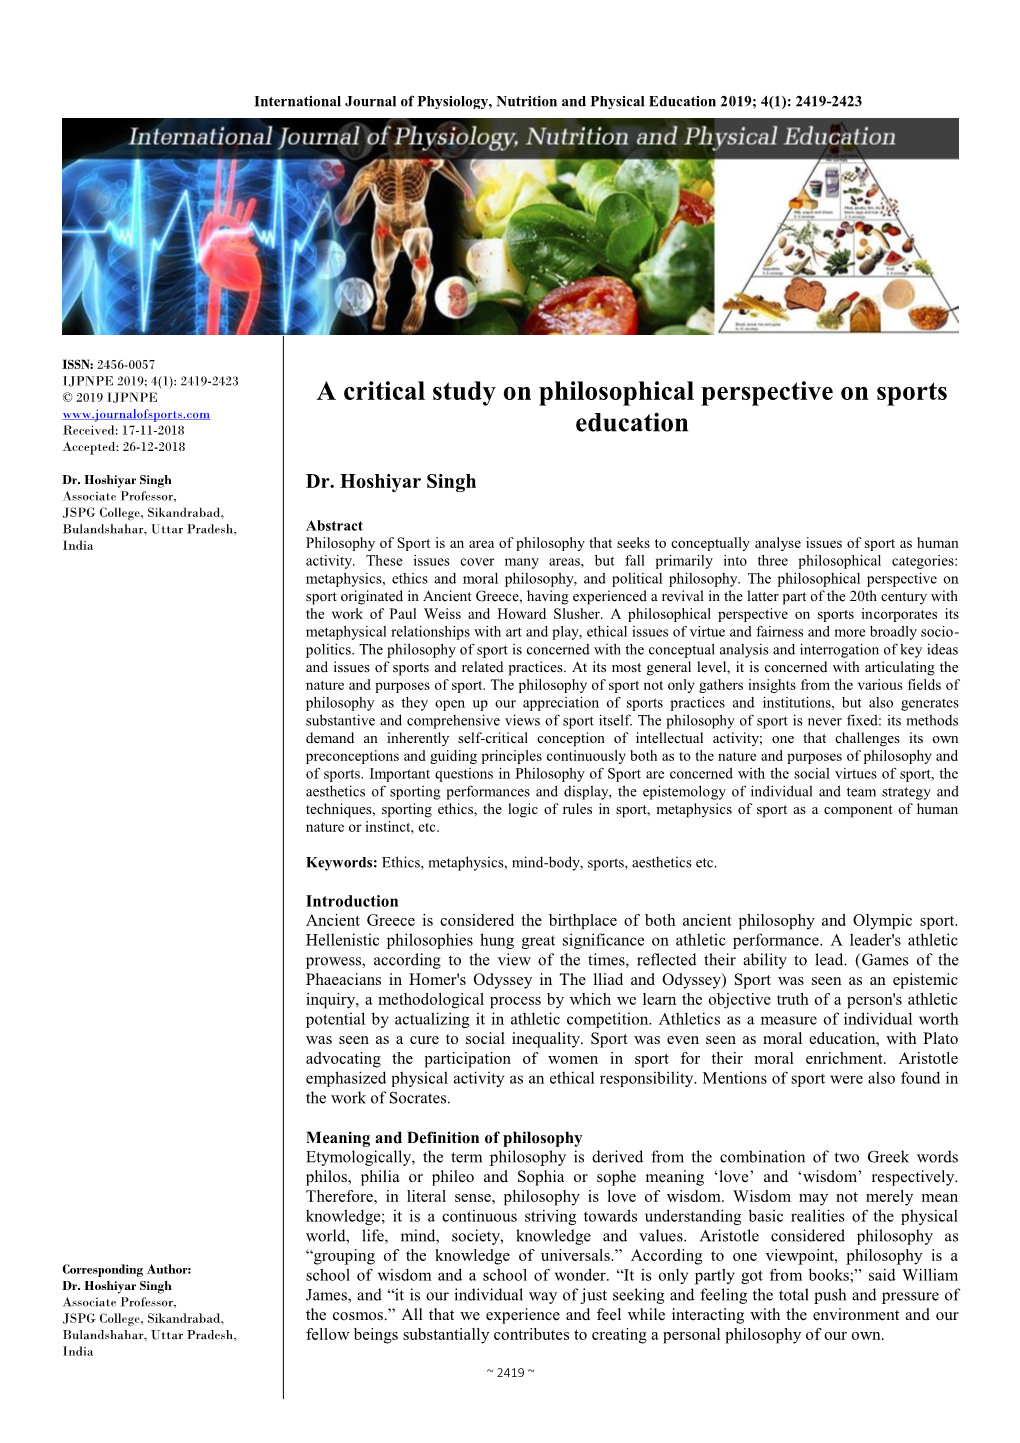 A Critical Study on Philosophical Perspective on Sports Education